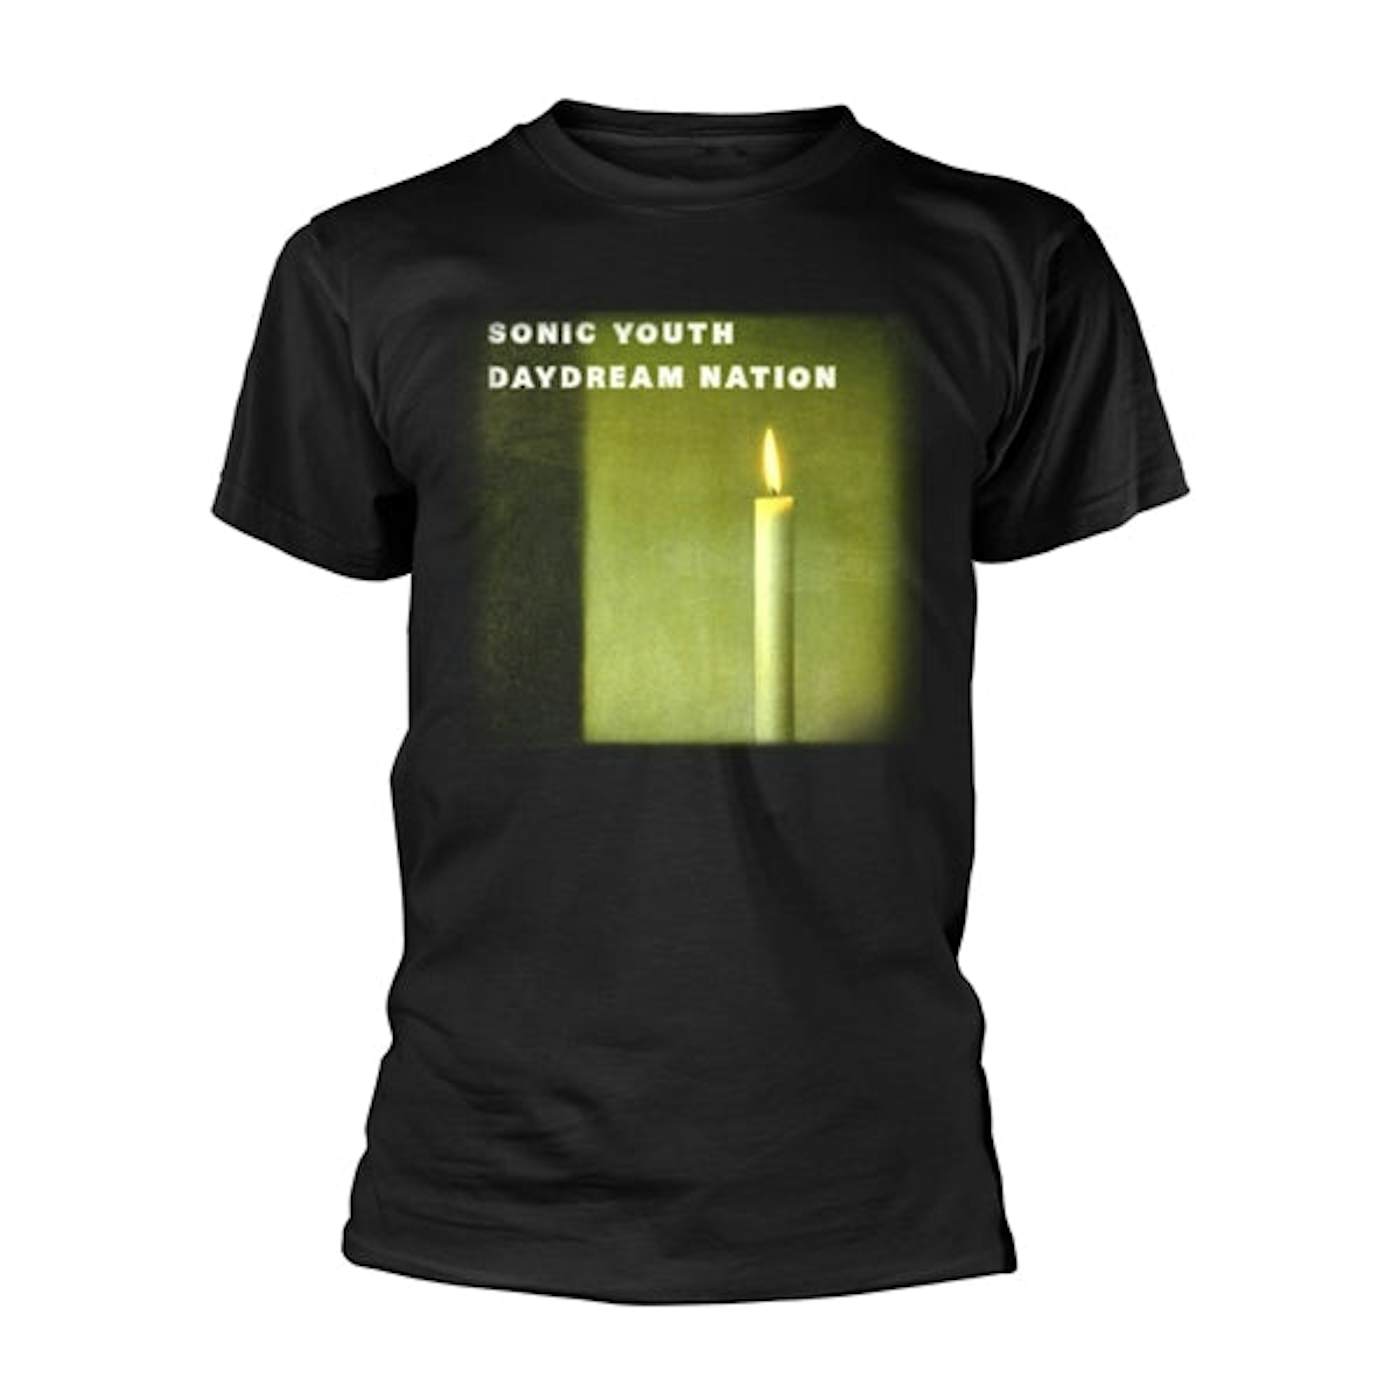 Sonic Youth T-Shirt - Daydream Nation